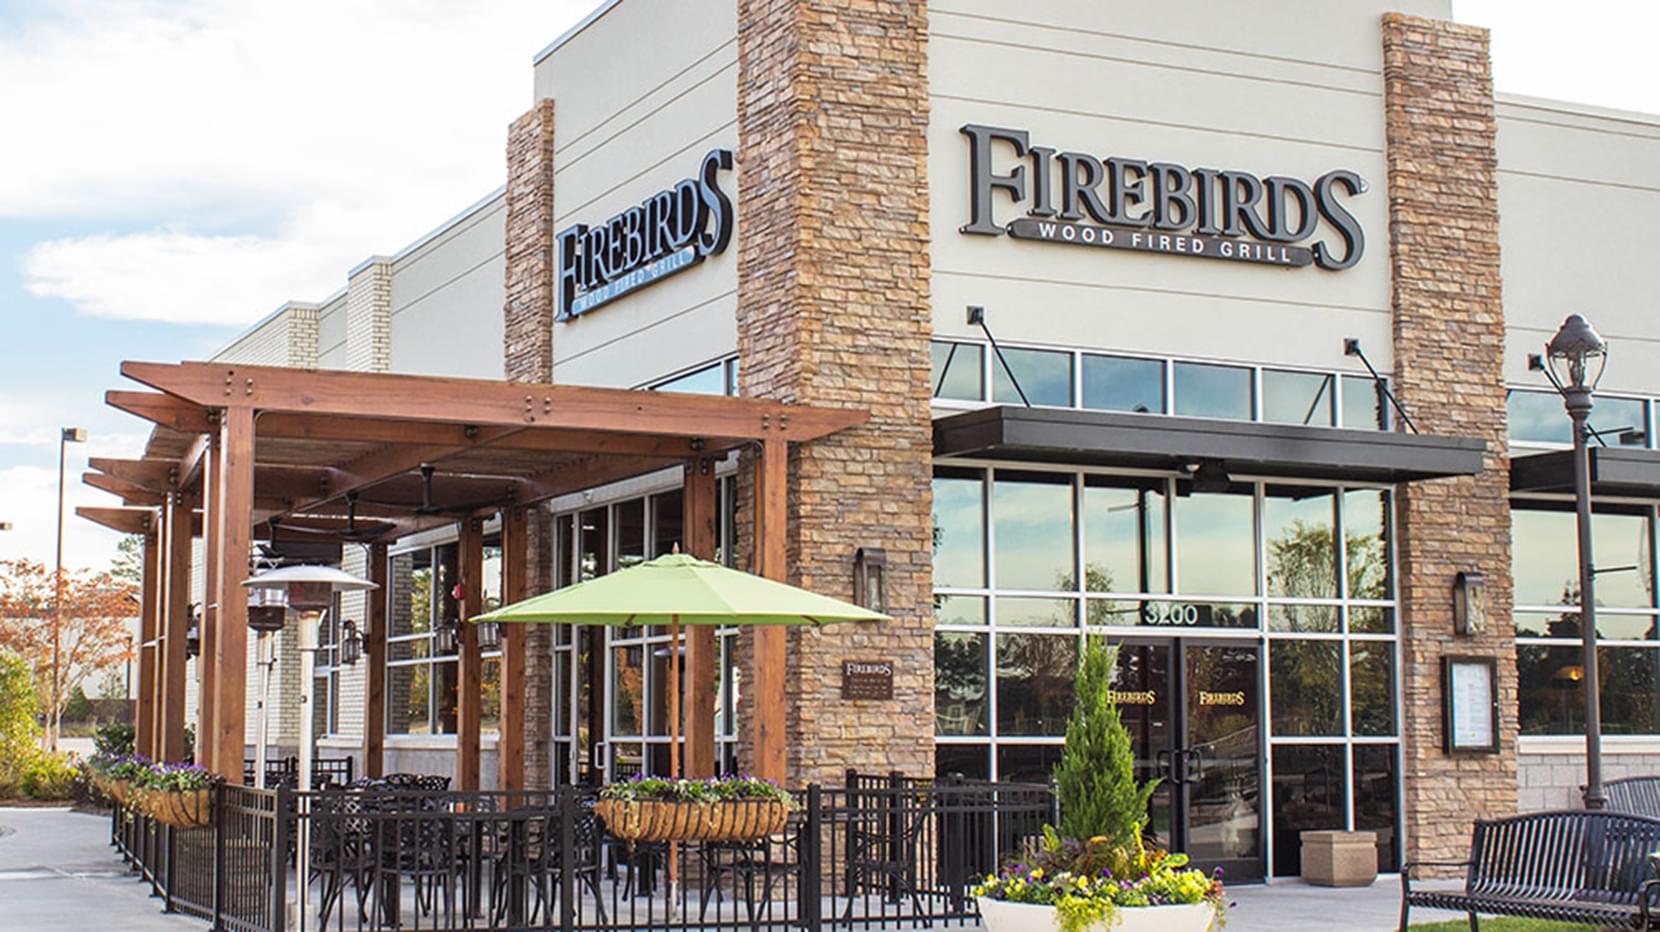 Exterior of Firebirds Wood Fired Grill in Morrisville, NC